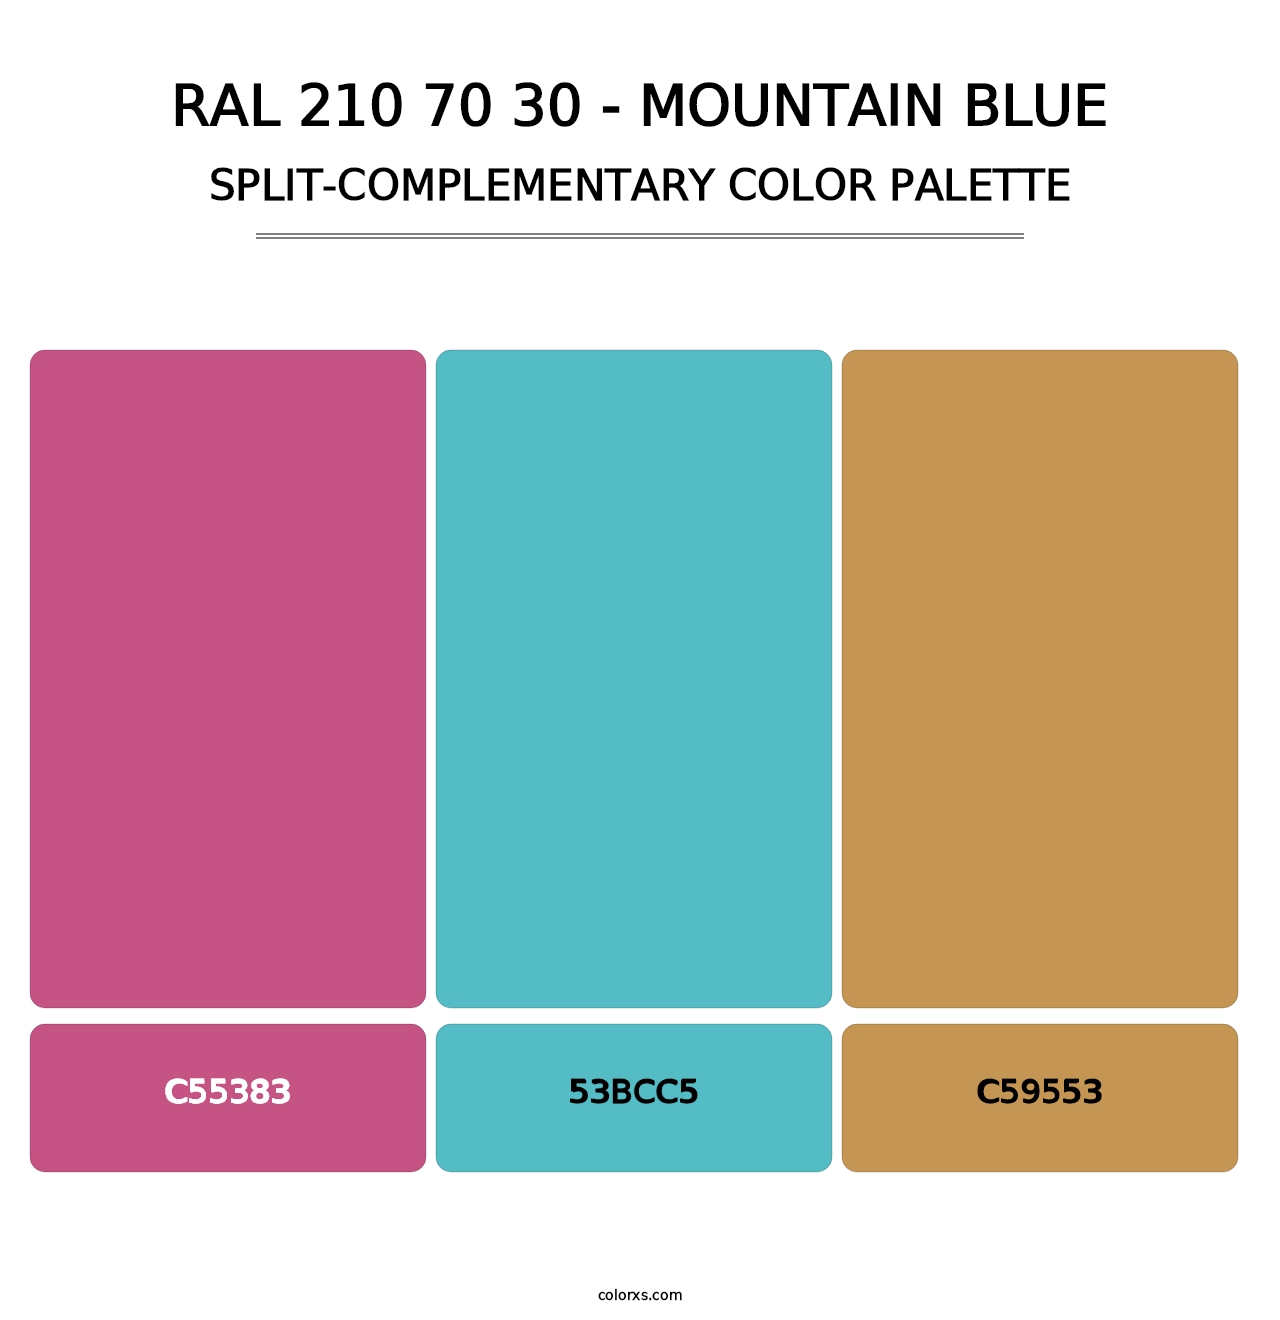 RAL 210 70 30 - Mountain Blue - Split-Complementary Color Palette